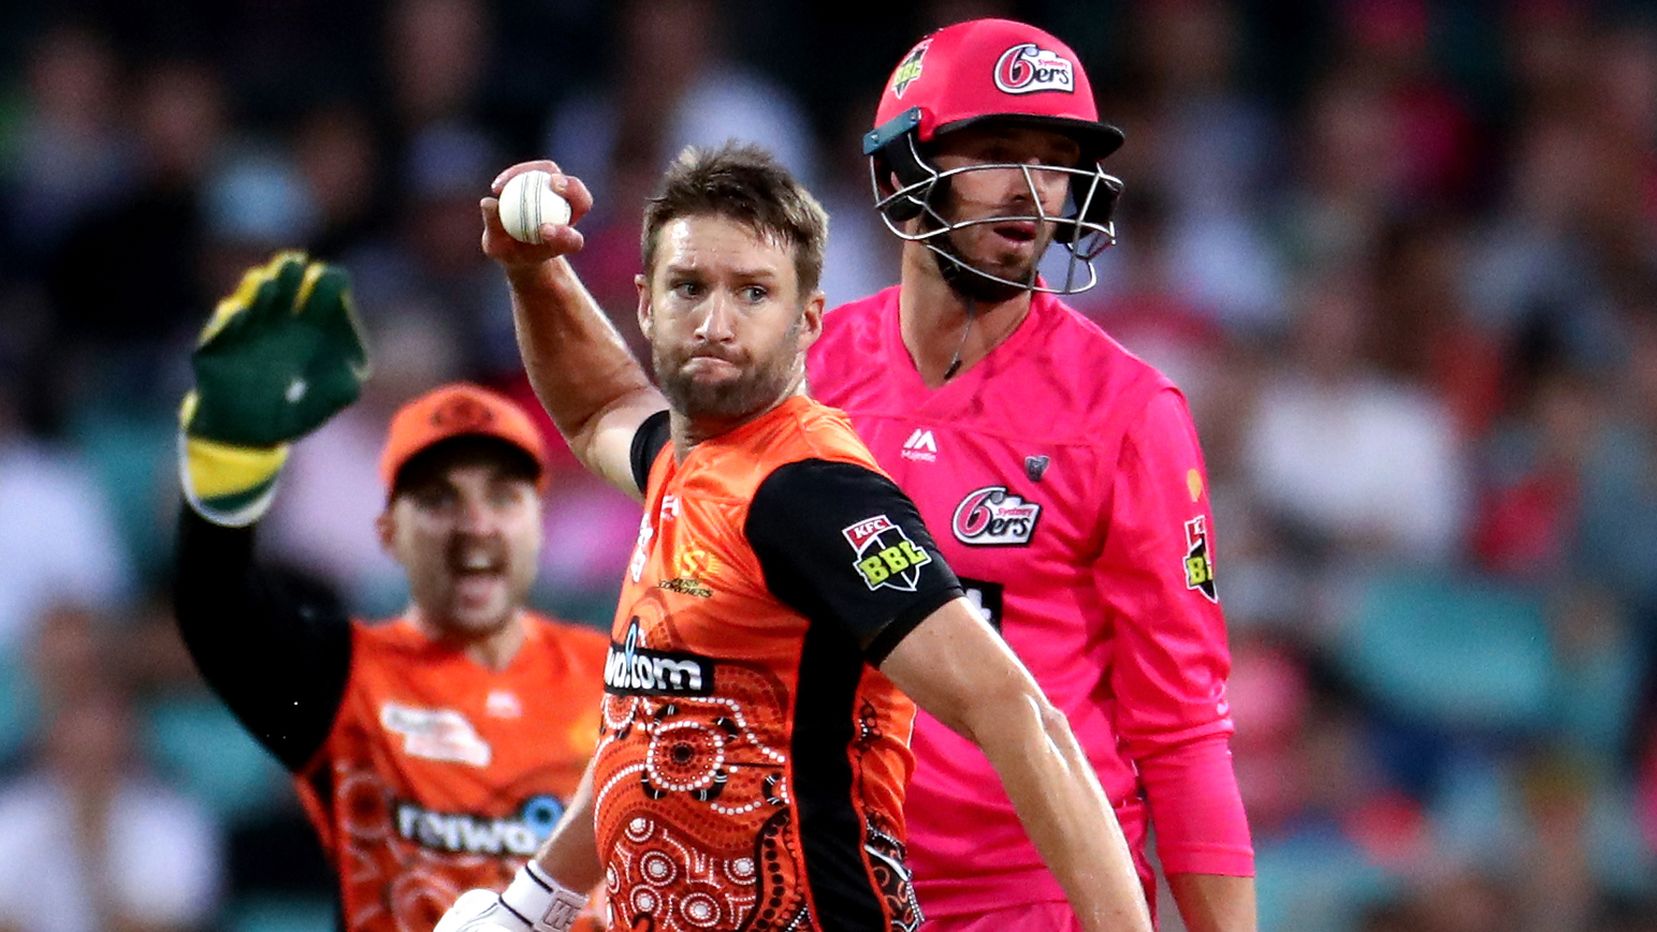 Big Bash League forced to move Perth Scorchers home game due to Western Australia's COVID-19 restrictions